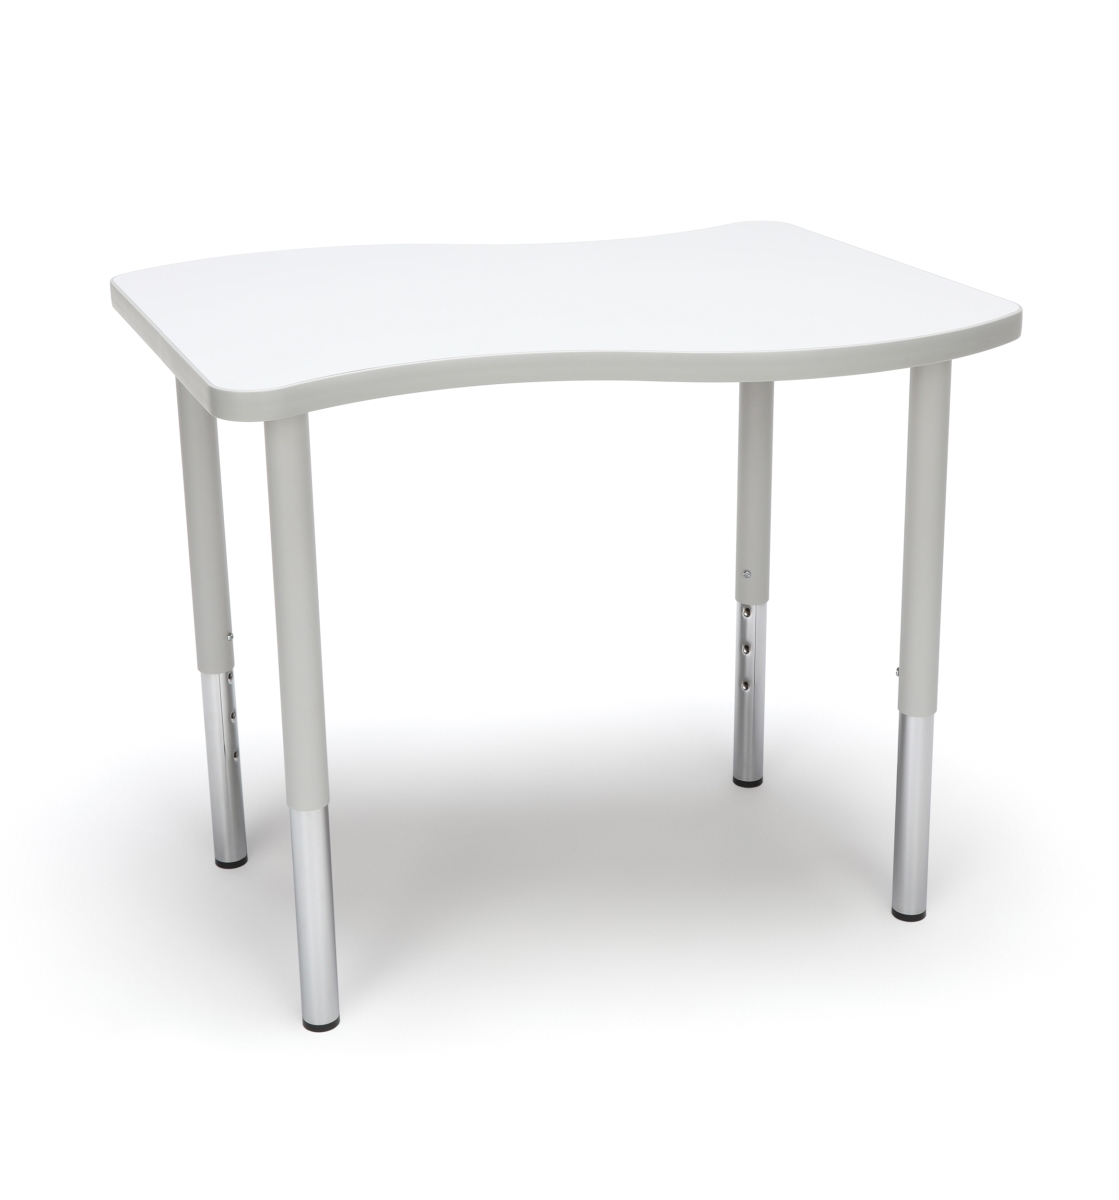 Wave-s-ll-wht Adapt Series Small Wave Standard Table - 23-31 In. Height Adjustable Desk, White